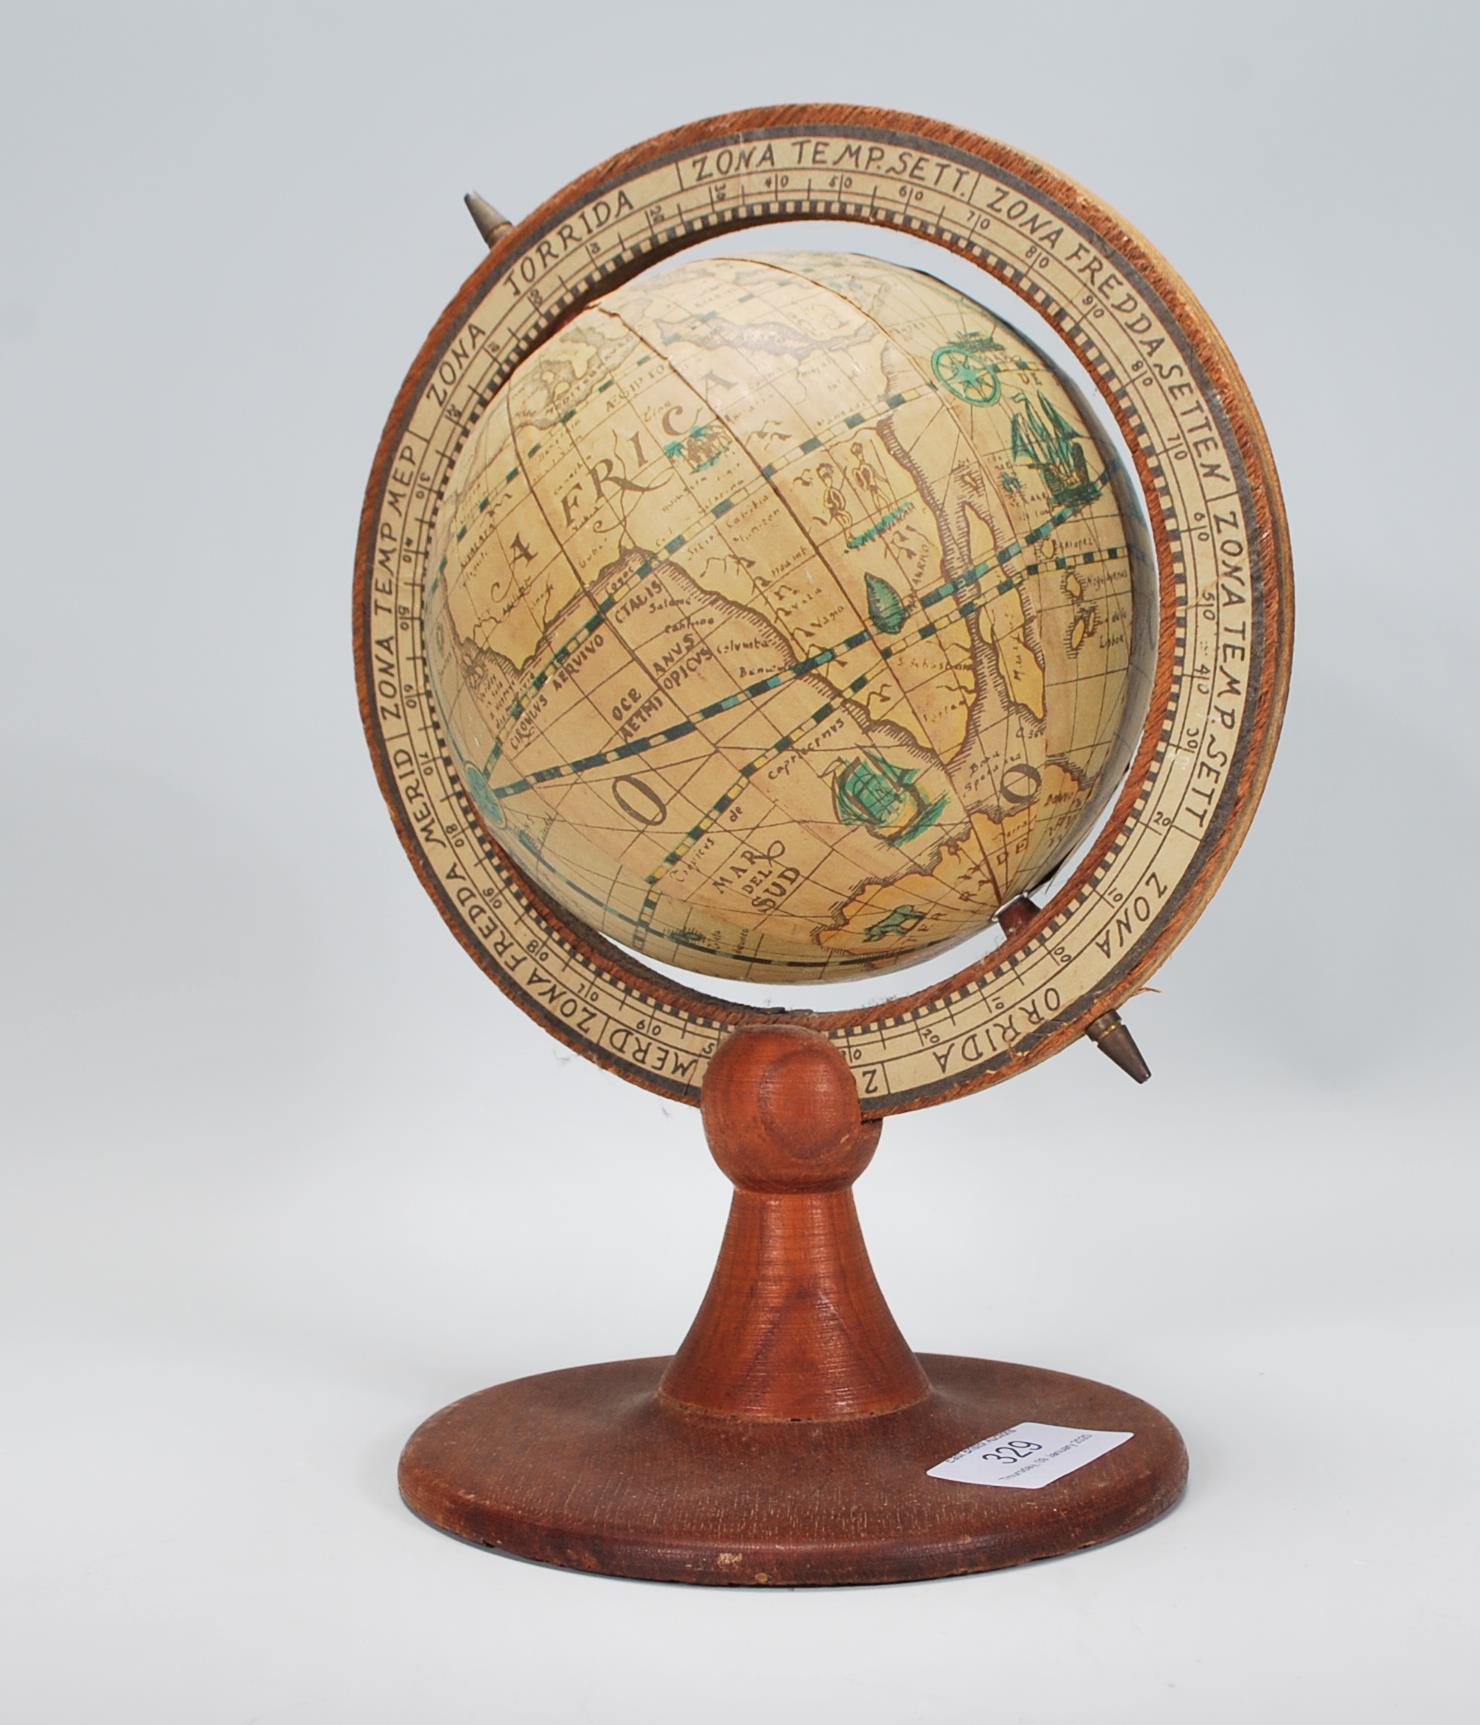 A antique style vintage desk top globe raised on a round wooden base with globe above set within a